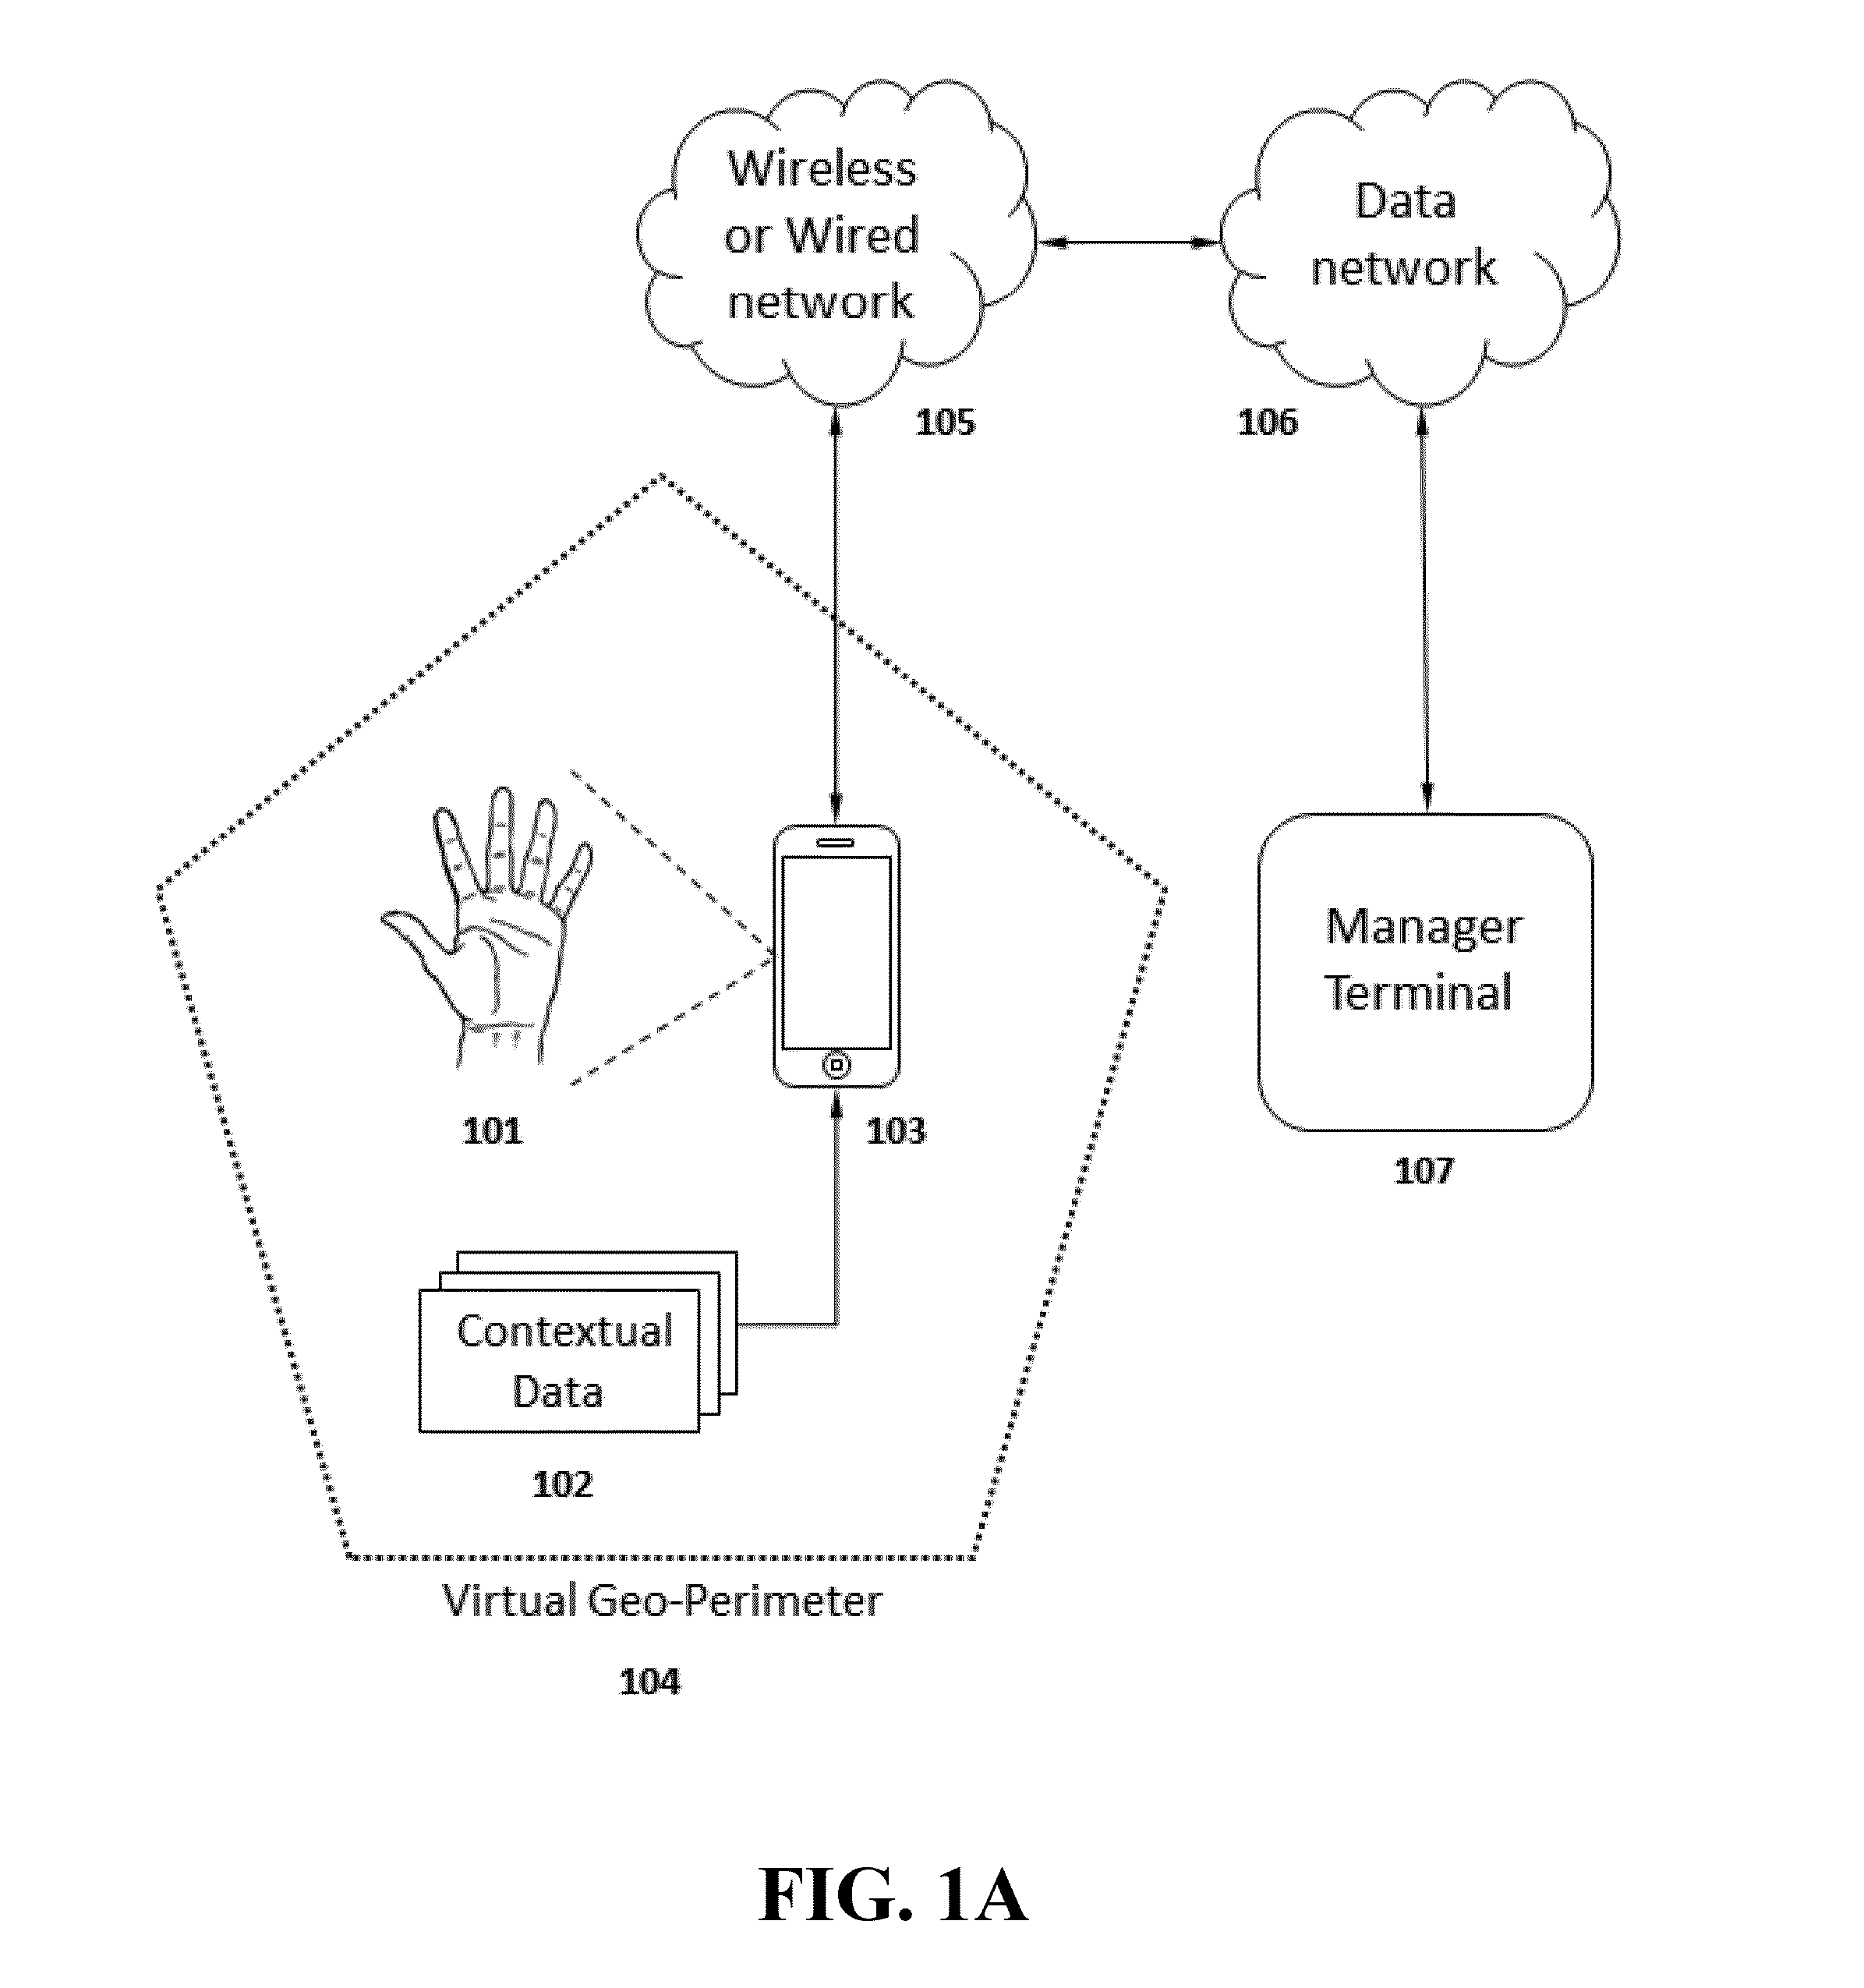 Attendance authentication and management in connection with mobile devices